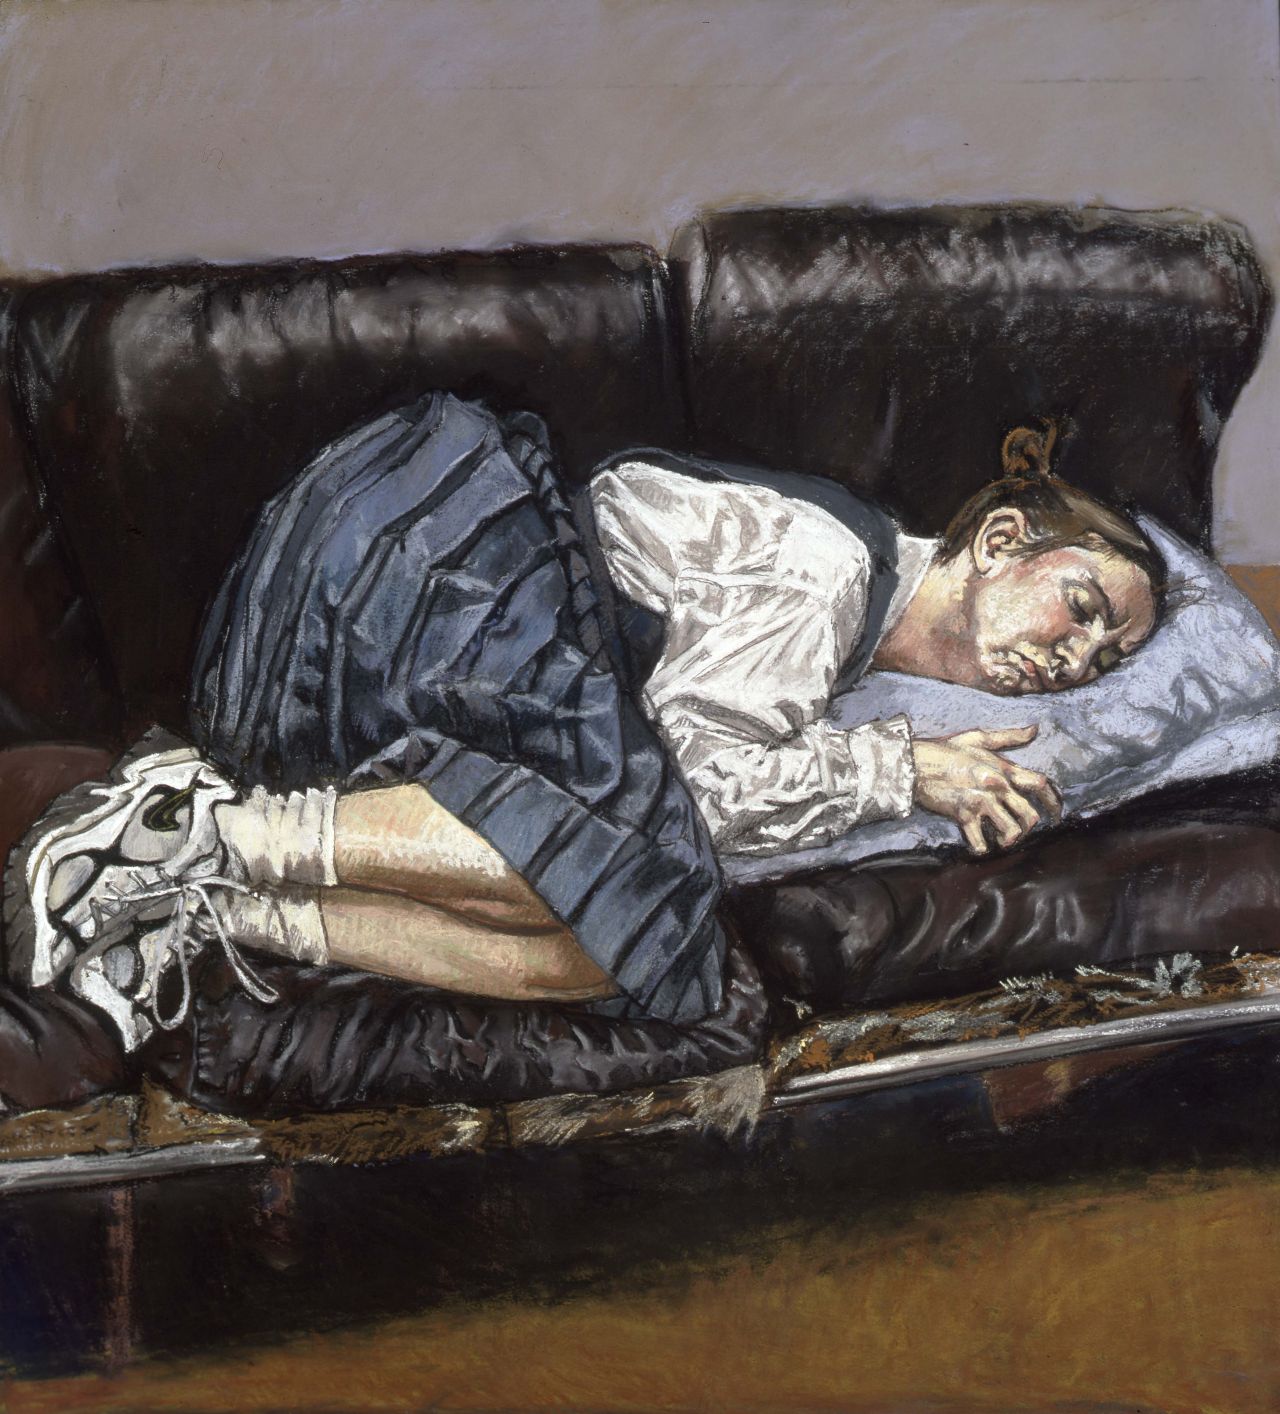 Paula REGO (b. 1935) Untitled No. 4, 1998 Pastel on paper, 110 x 100 cm Collection: Private Collection © Paula Rego, courtesy of Marlborough, New York and London